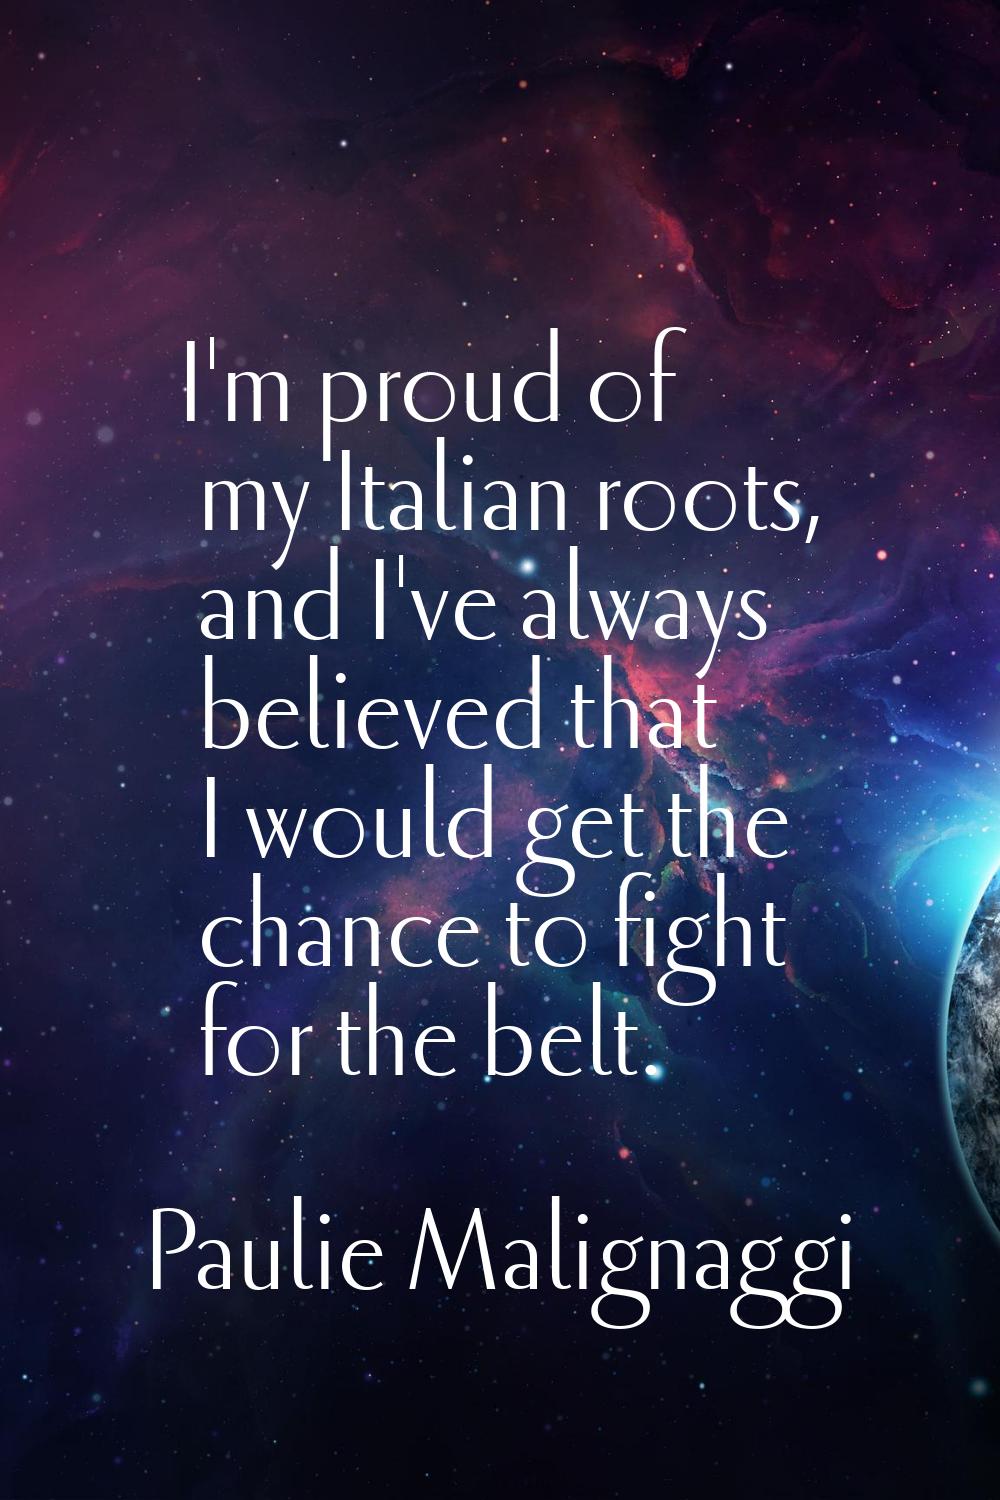 I'm proud of my Italian roots, and I've always believed that I would get the chance to fight for th